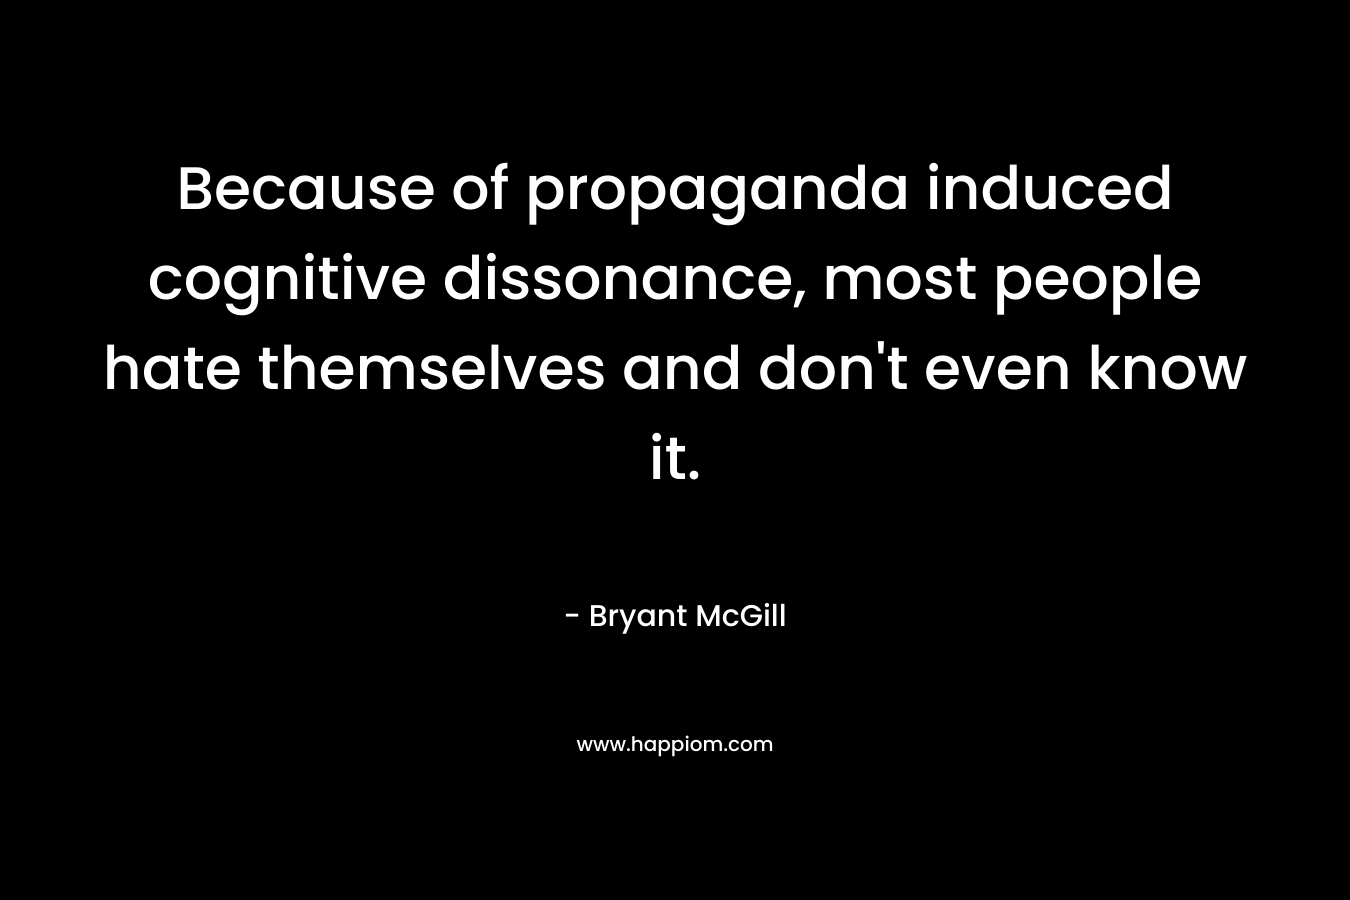 Because of propaganda induced cognitive dissonance, most people hate themselves and don’t even know it. – Bryant McGill